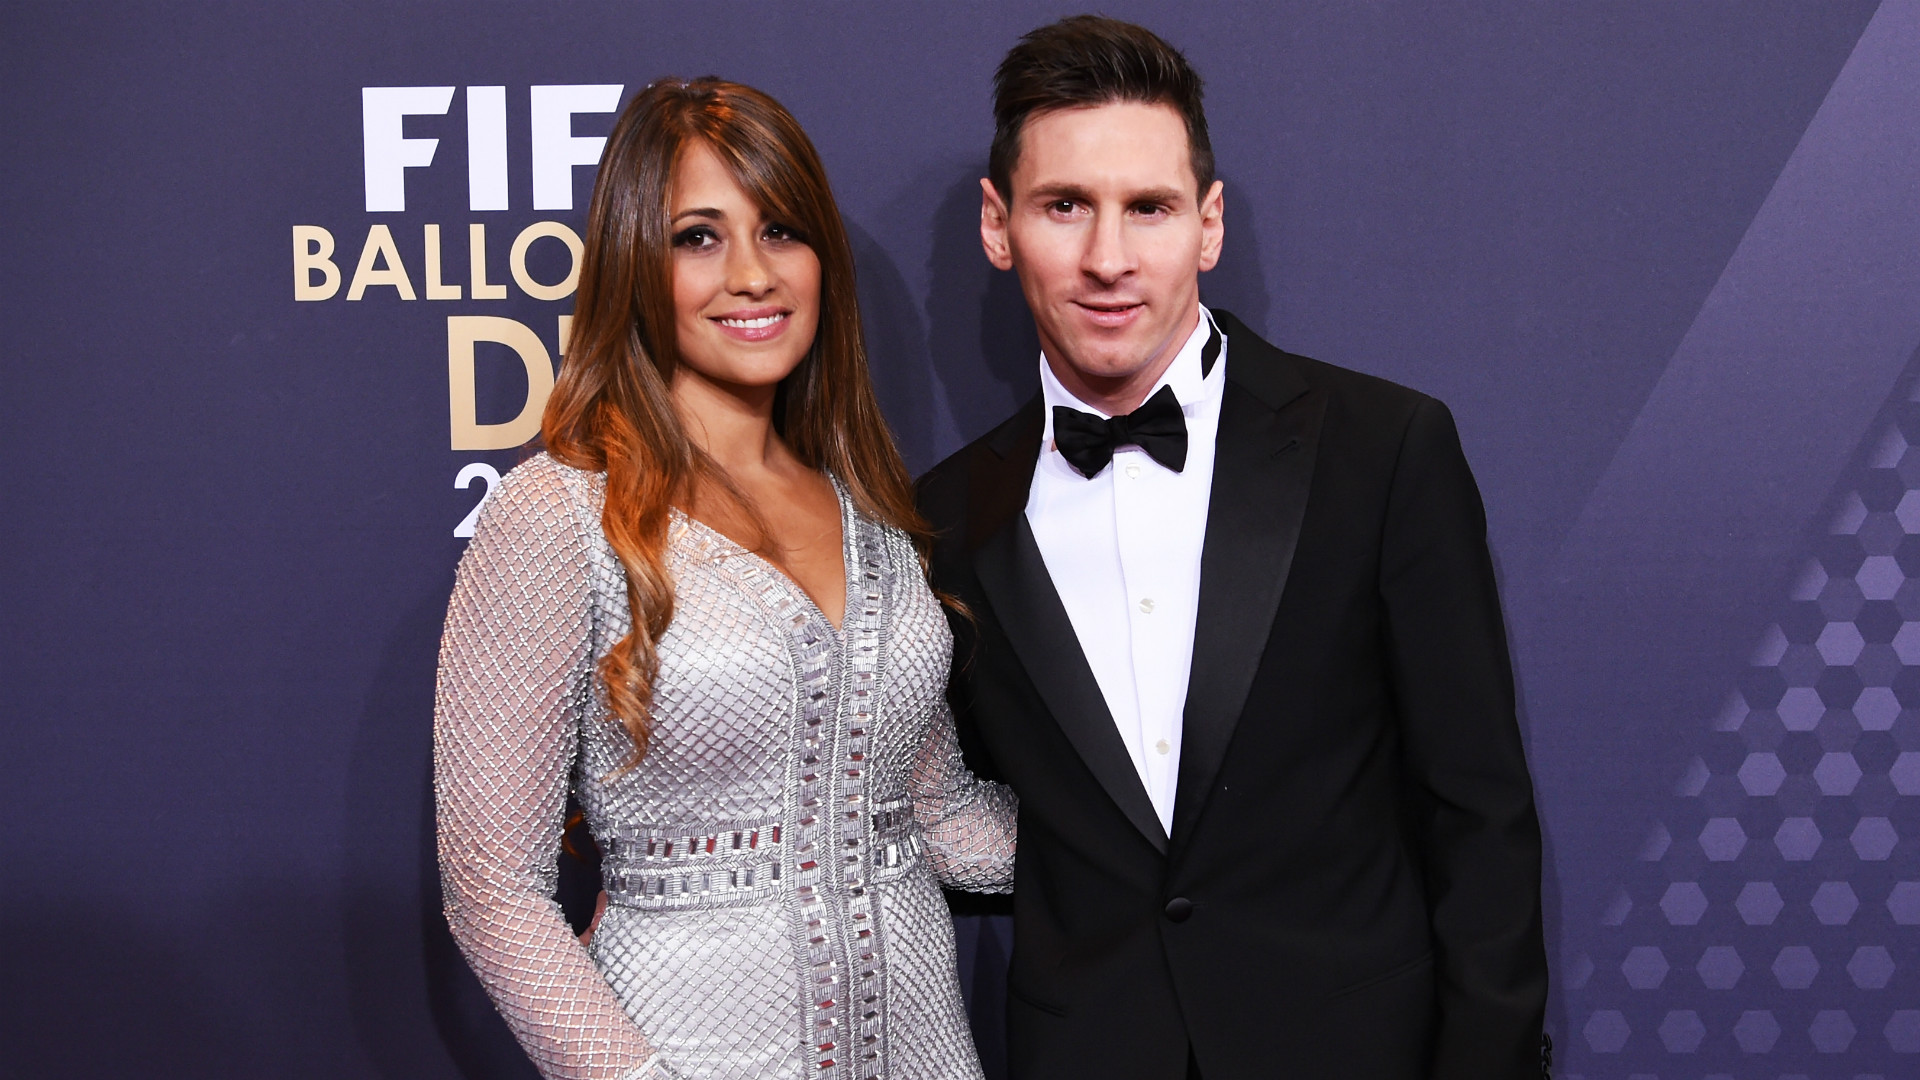 Antonella Roccuzzo - Lionel Messi's Wife, Wiki, Facts And Net Worth In 2022